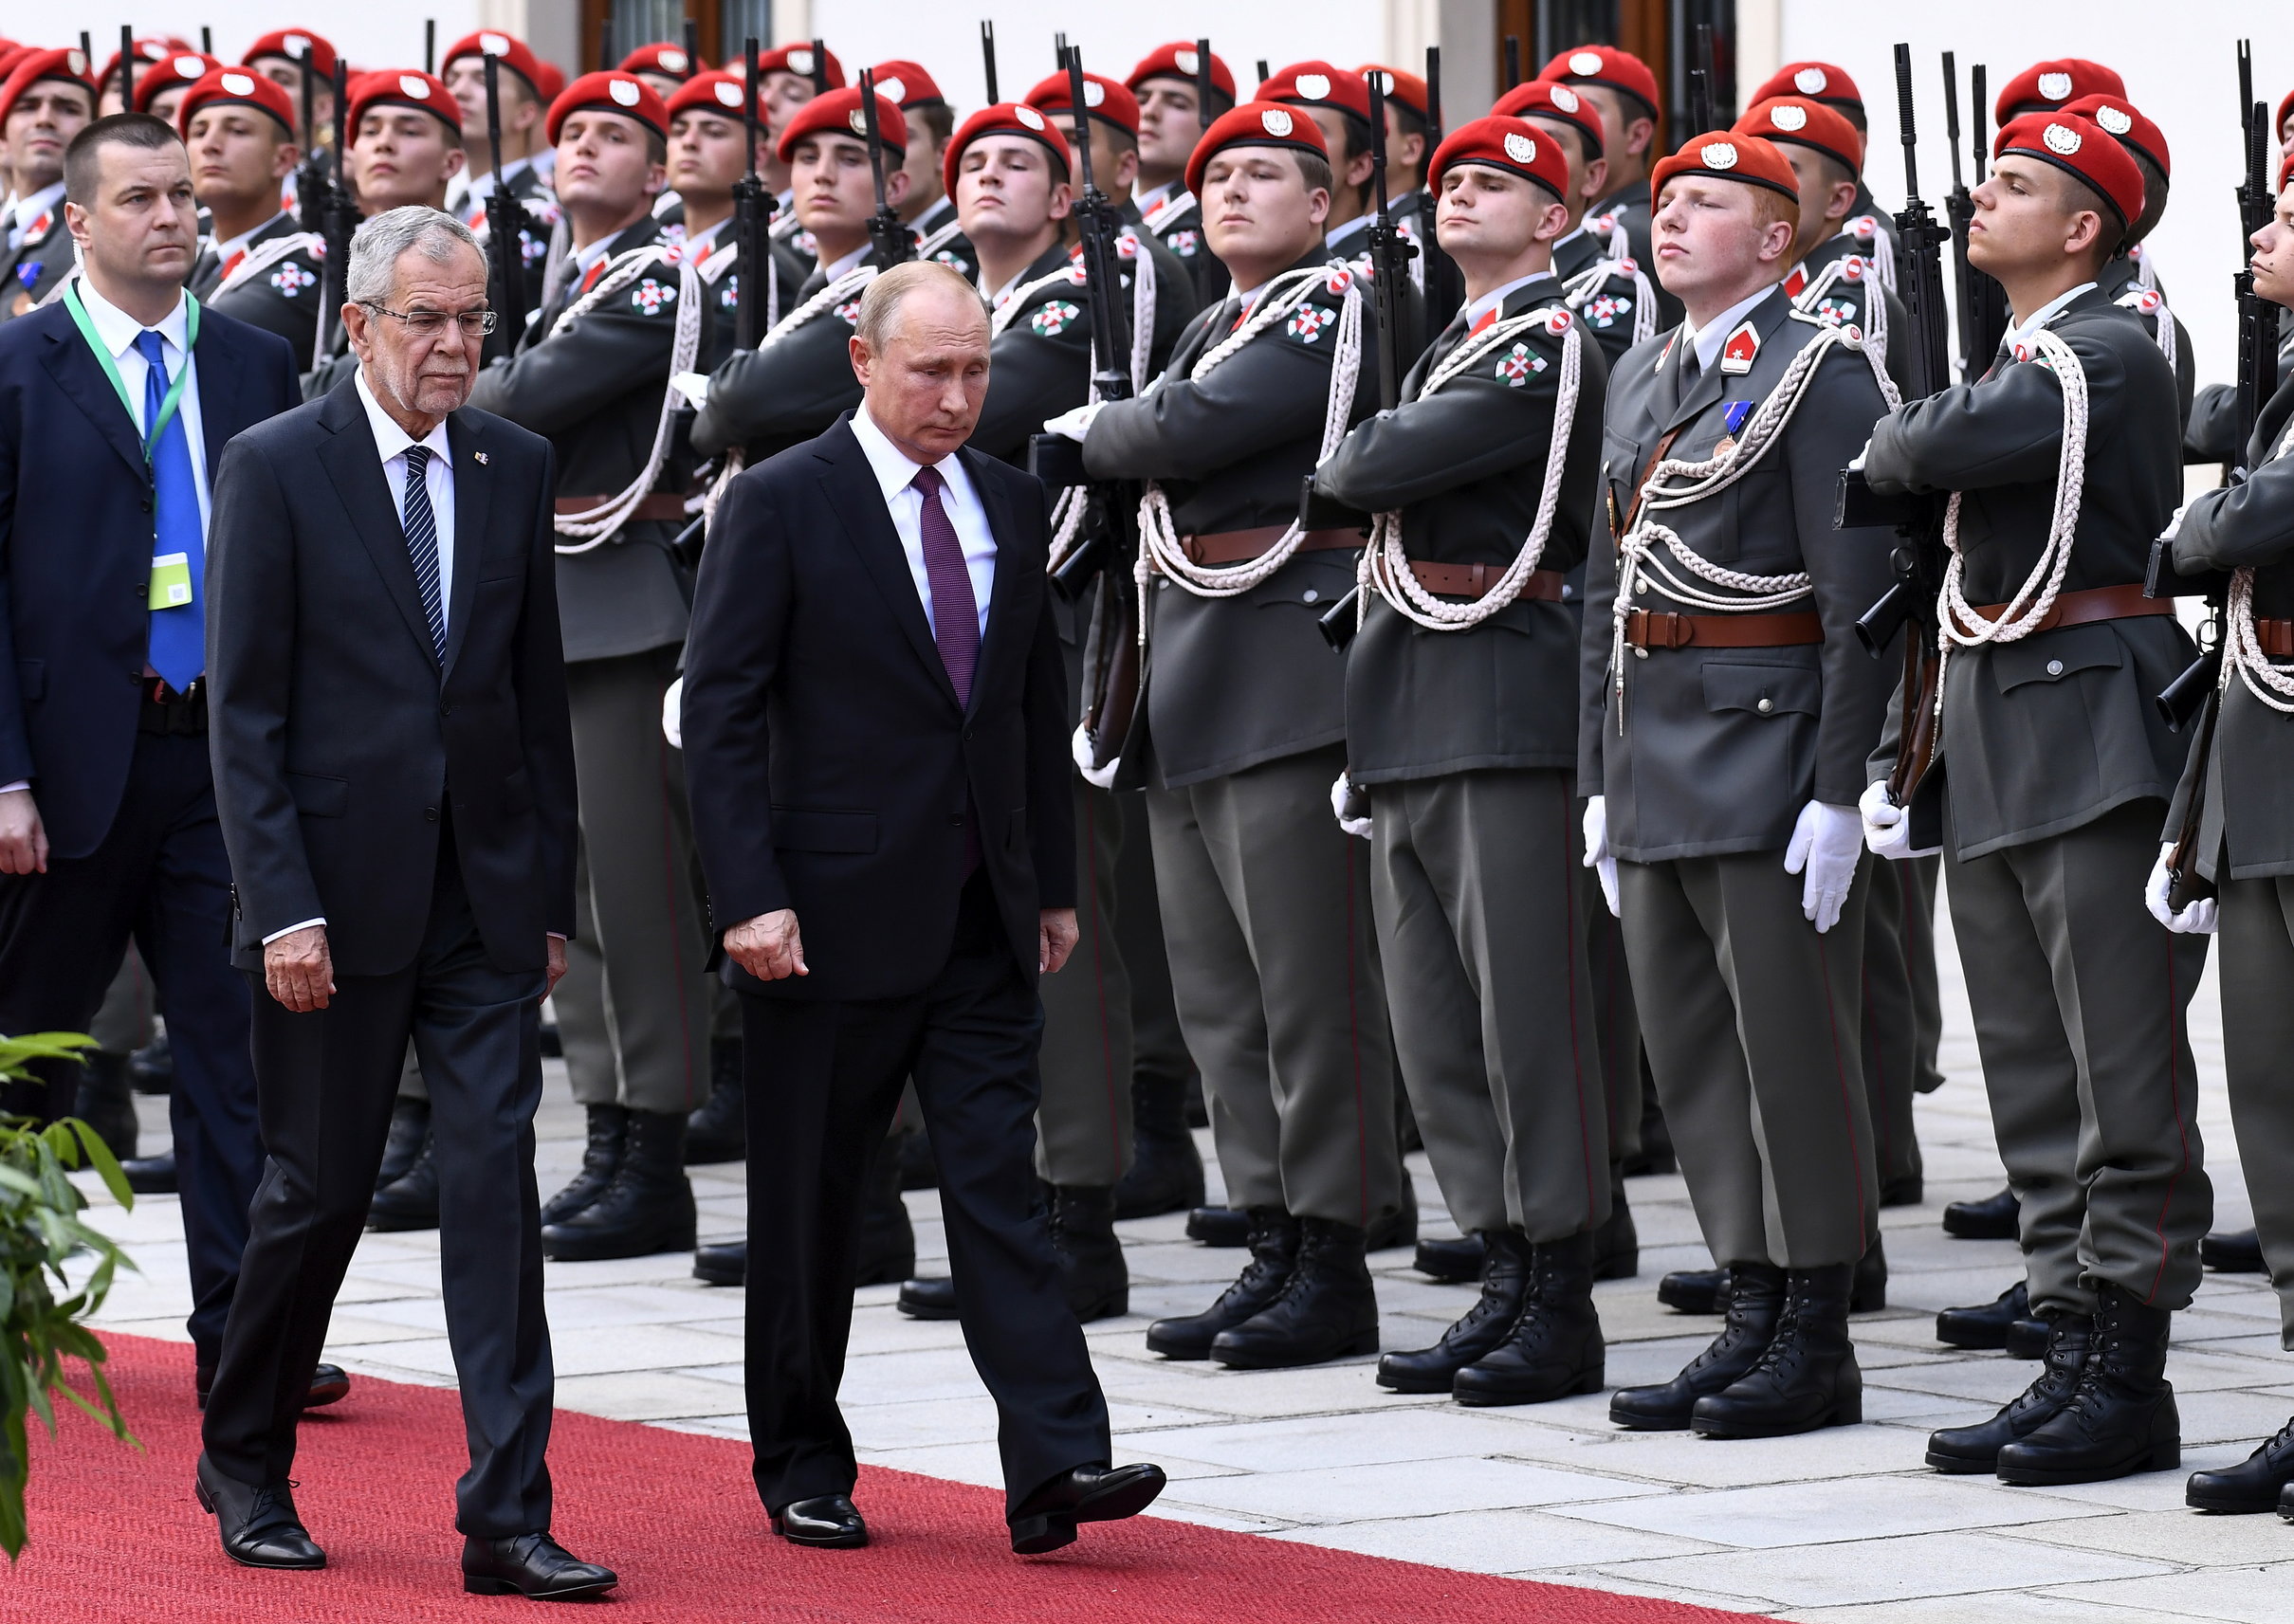 epa06786368 Russian President Vladimir Putin (R) and Austrian Federal President Alexander Van der Bellen (L) pass the Guard of Honor, prior to their meeting at the presidential office of the Hofburg Palace in Vienna, Austria, 05 June 2018. Putin is in Austria for a one-day official state visit.  EPA/CHRISTIAN BRUNA